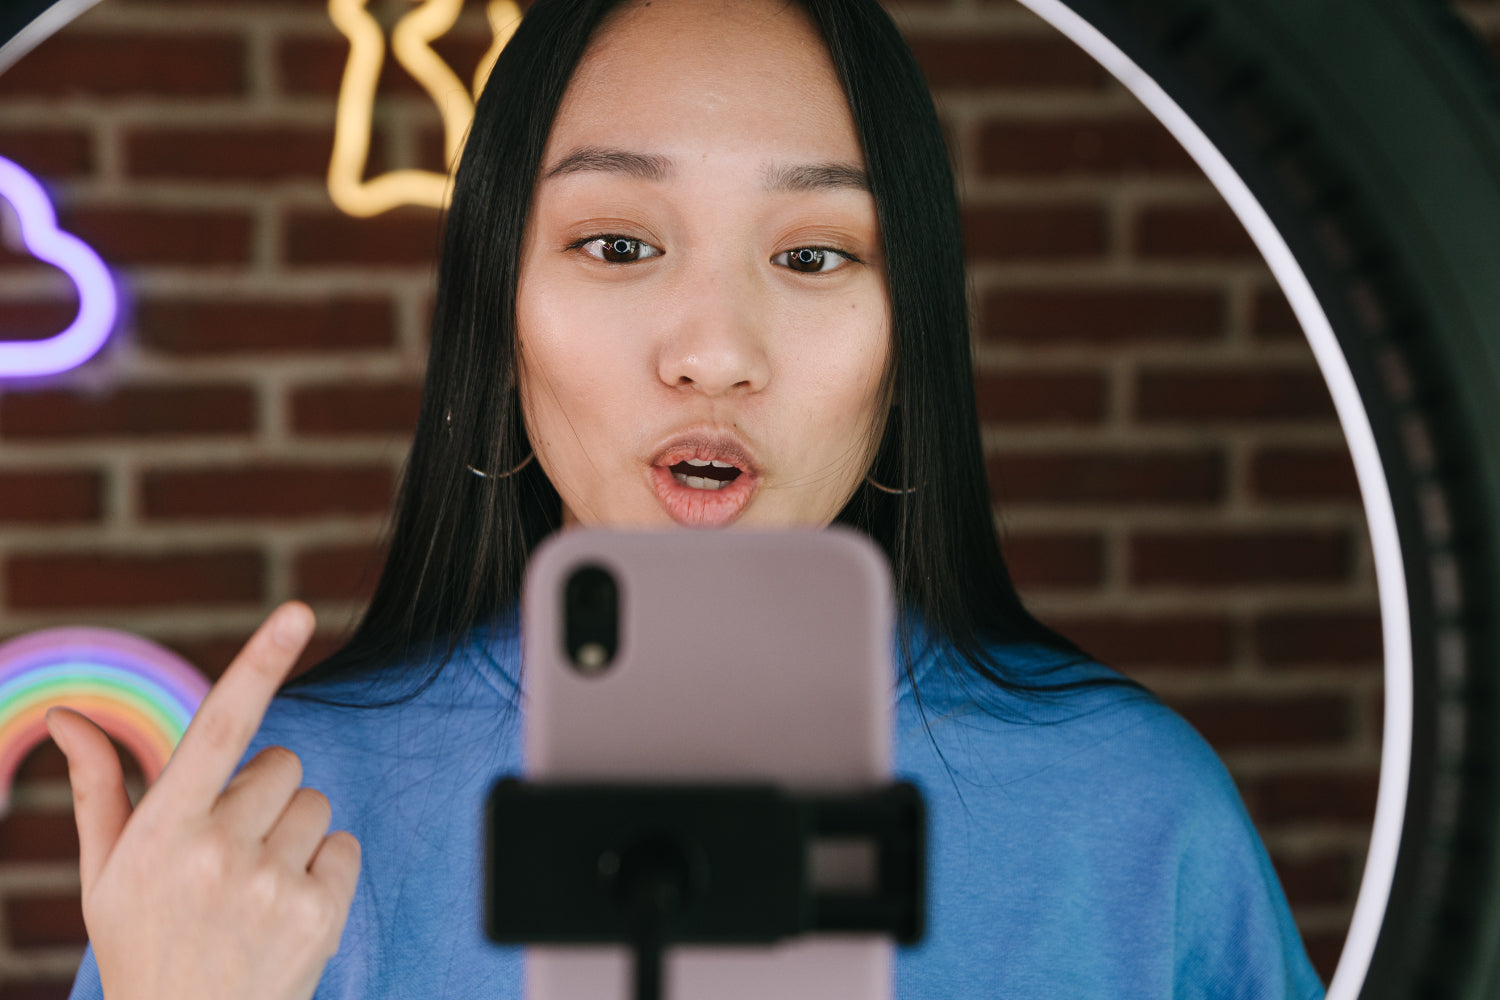 An influencer makes money online performing for a mobile phone camera